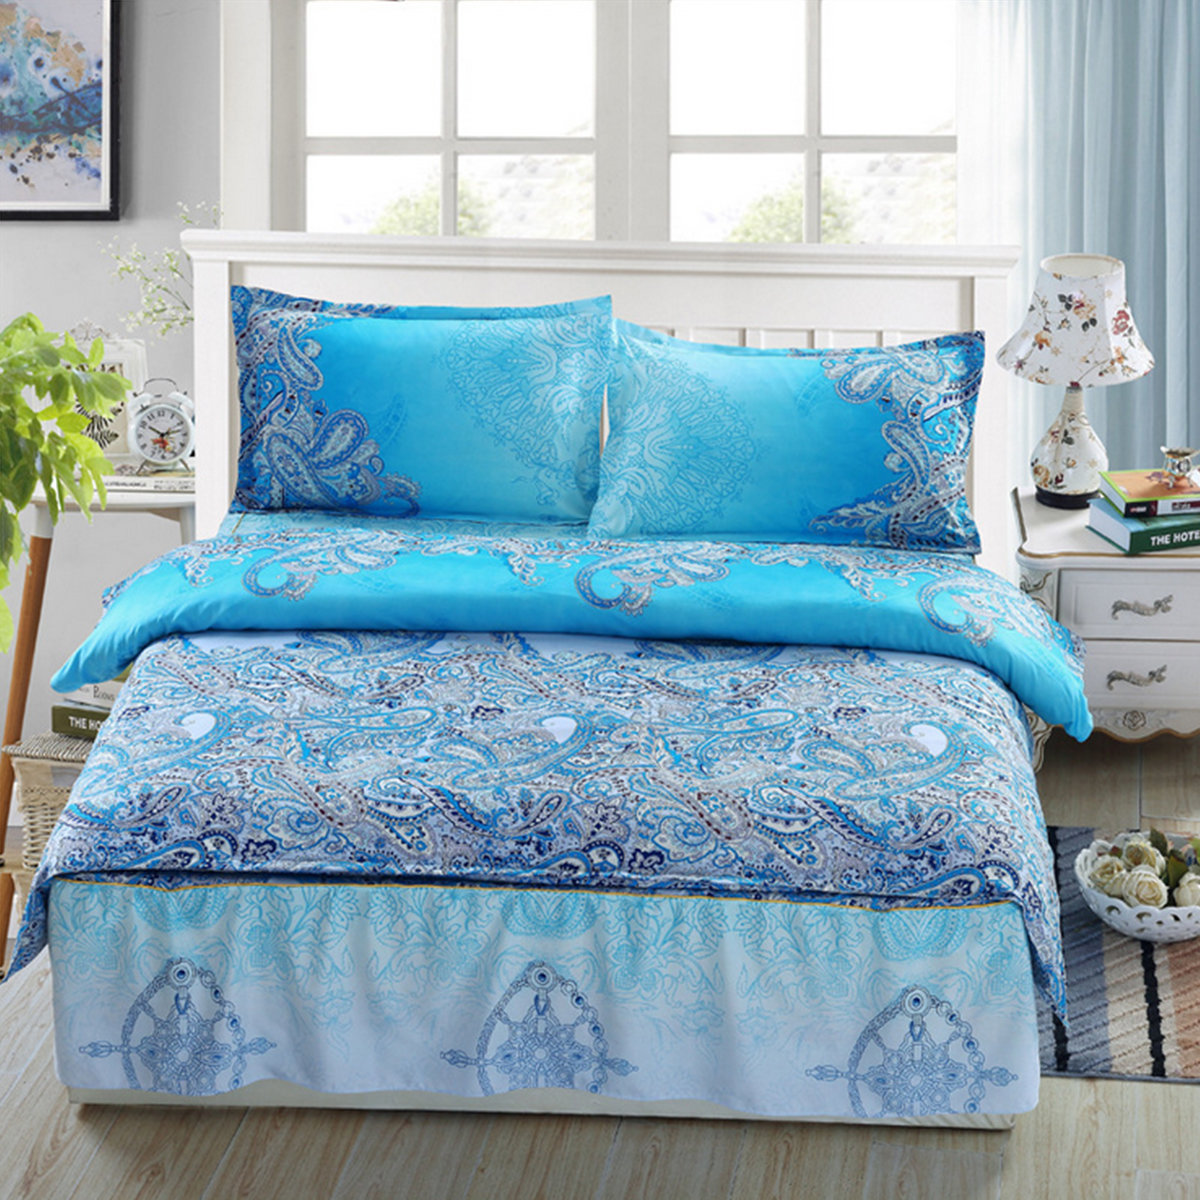 Hot-sale Blue Print Style Queen Size Galaxy Bedding Quilt ...